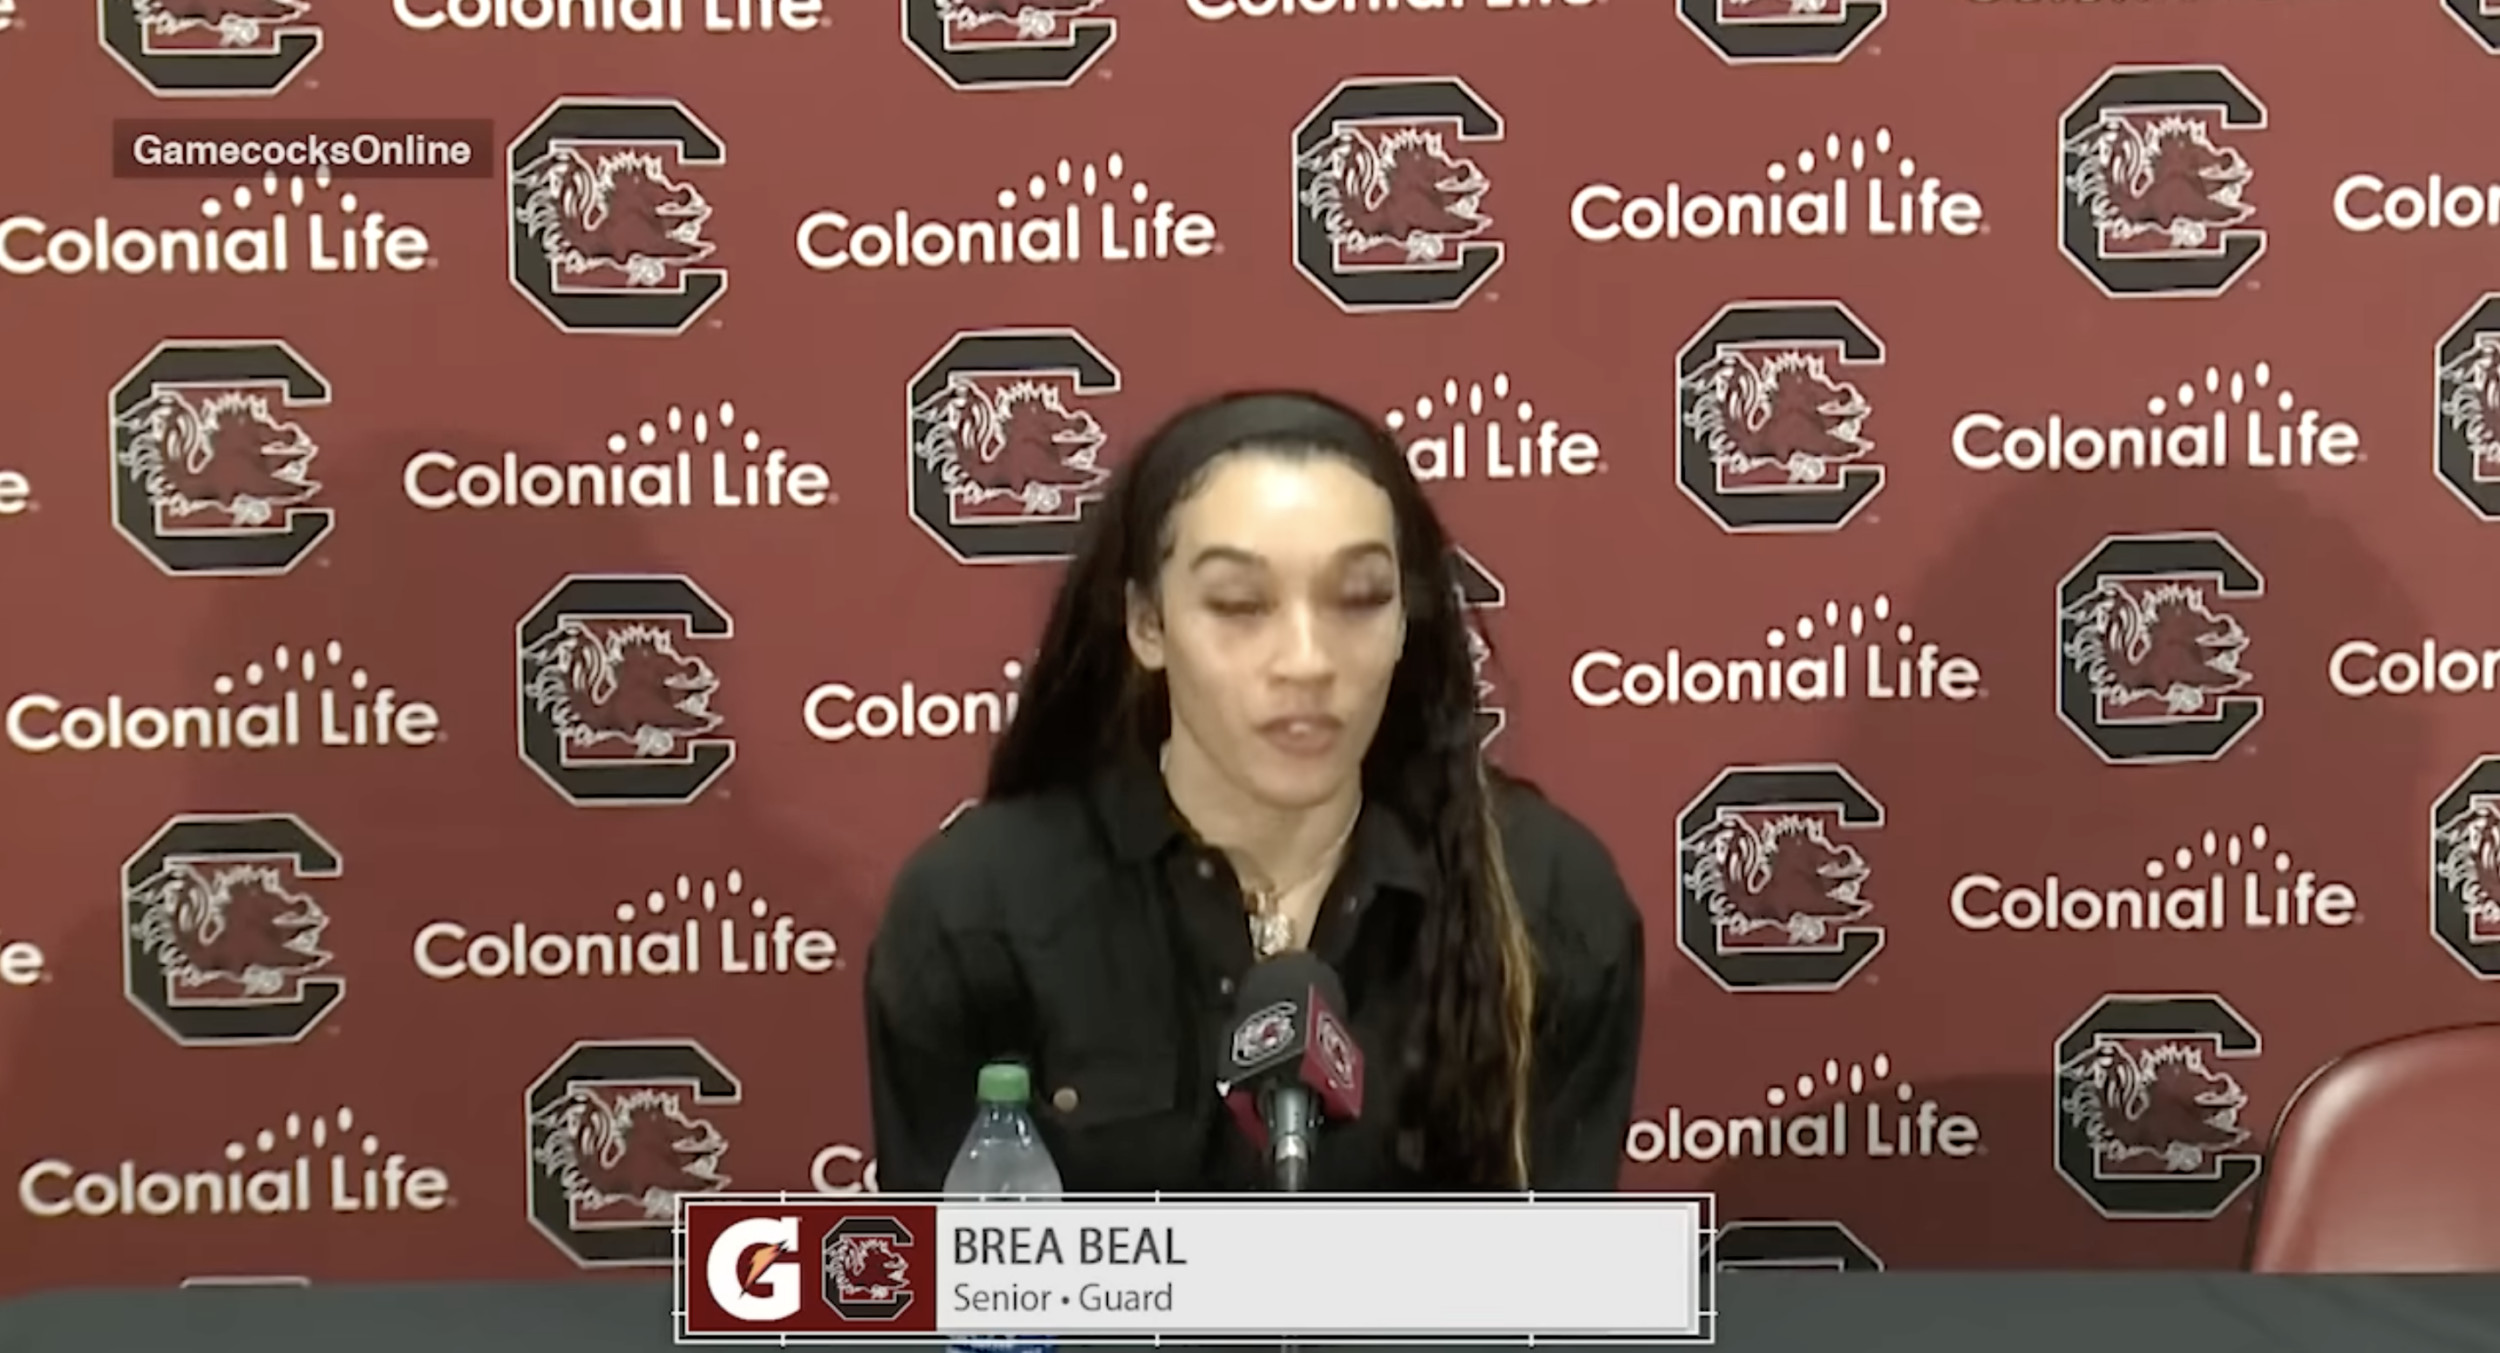 PostGame News Conference: (Kentucky) - Brea Beal